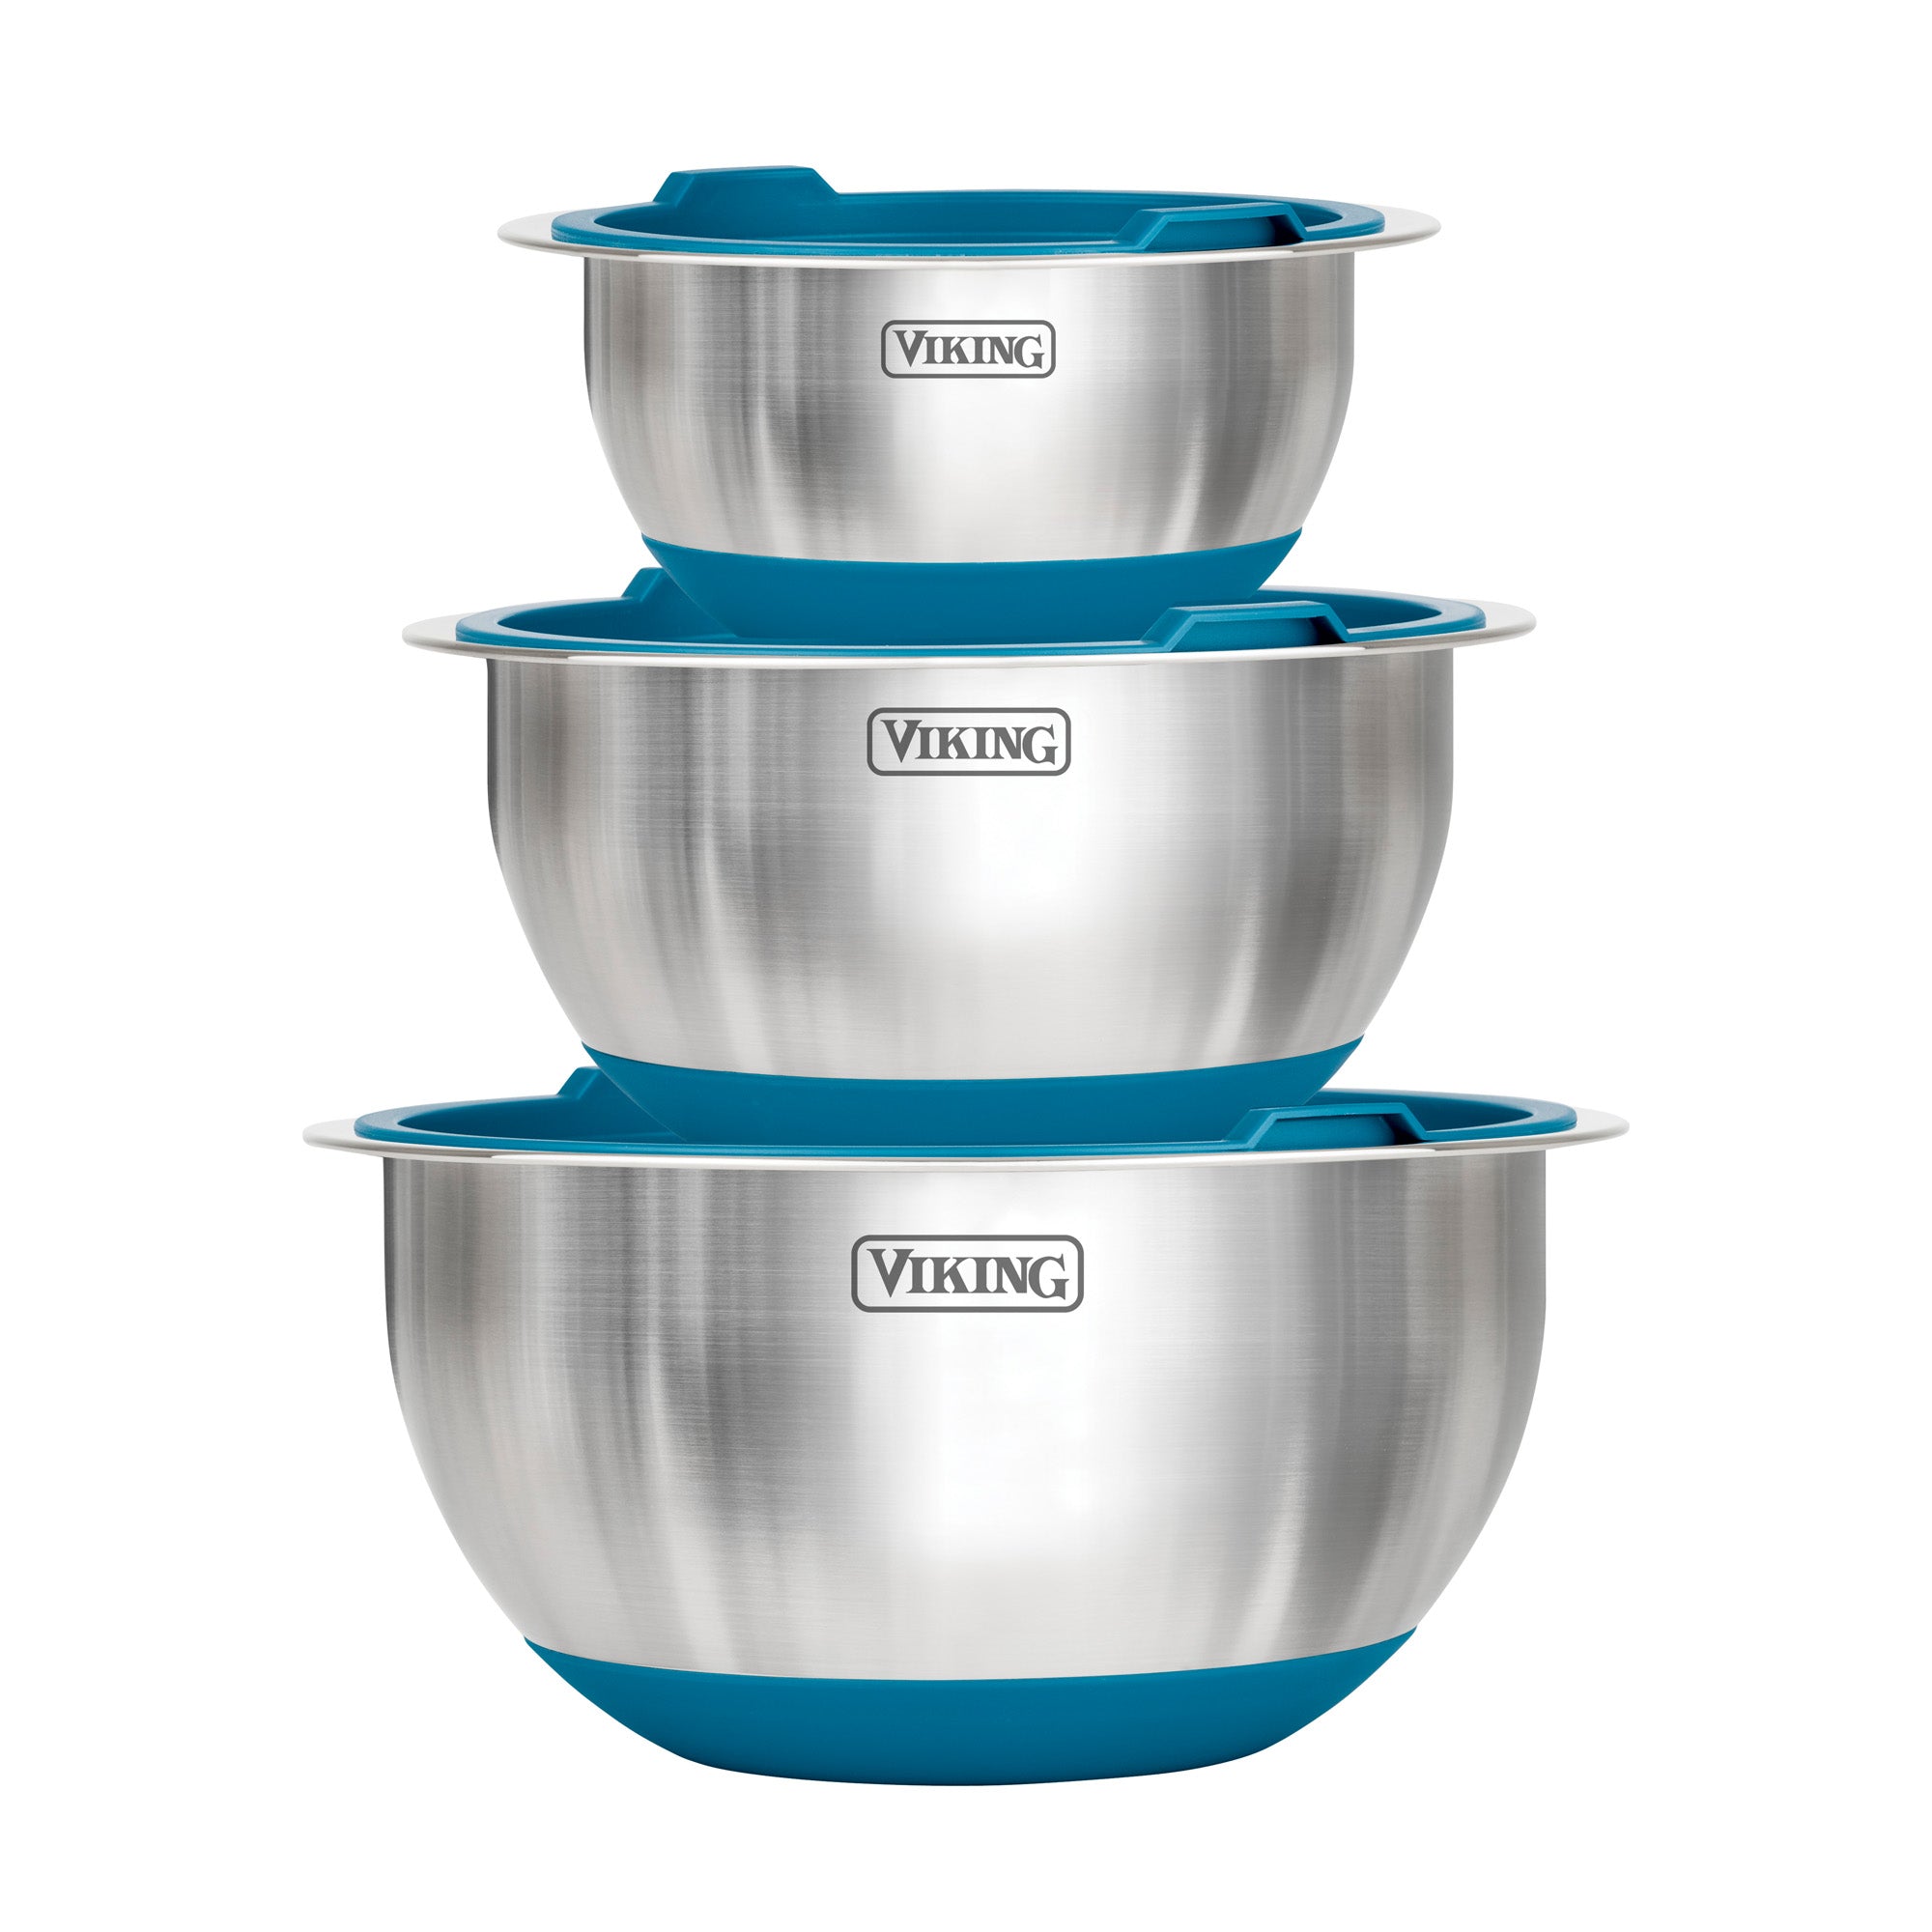 Looking for stainless steel mixing bowls that resist scratches